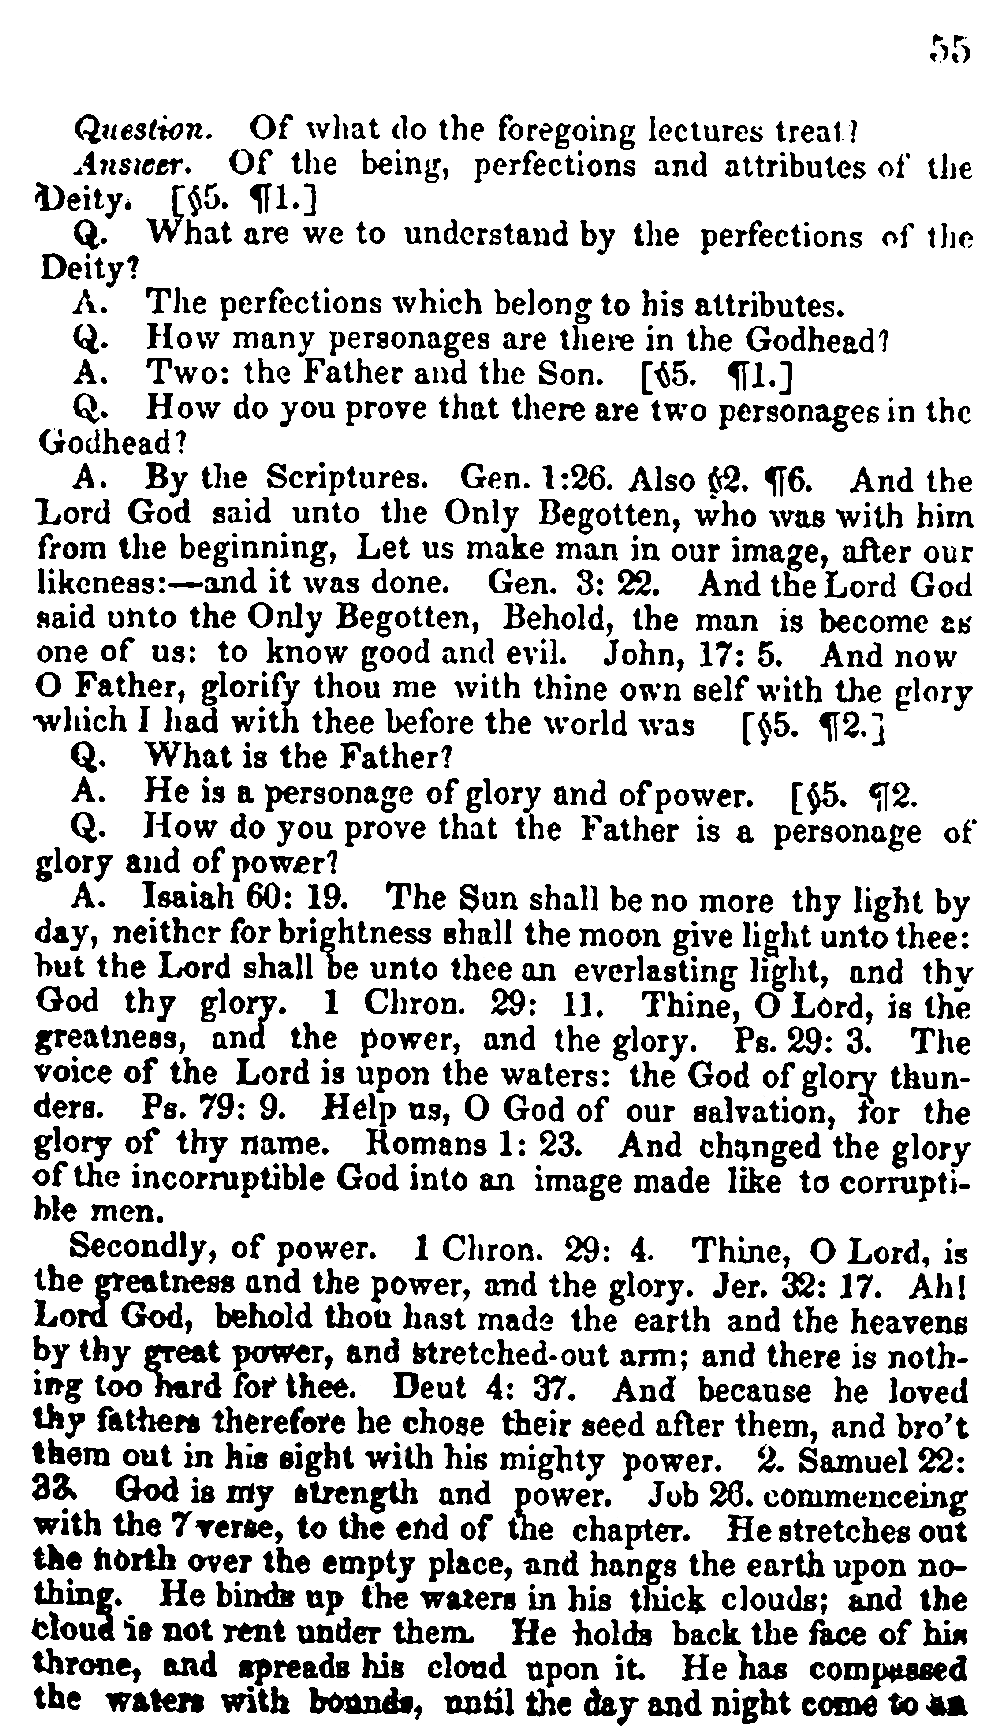 1835 Doctrine & Covenants - Lectures on Faith, p. 55